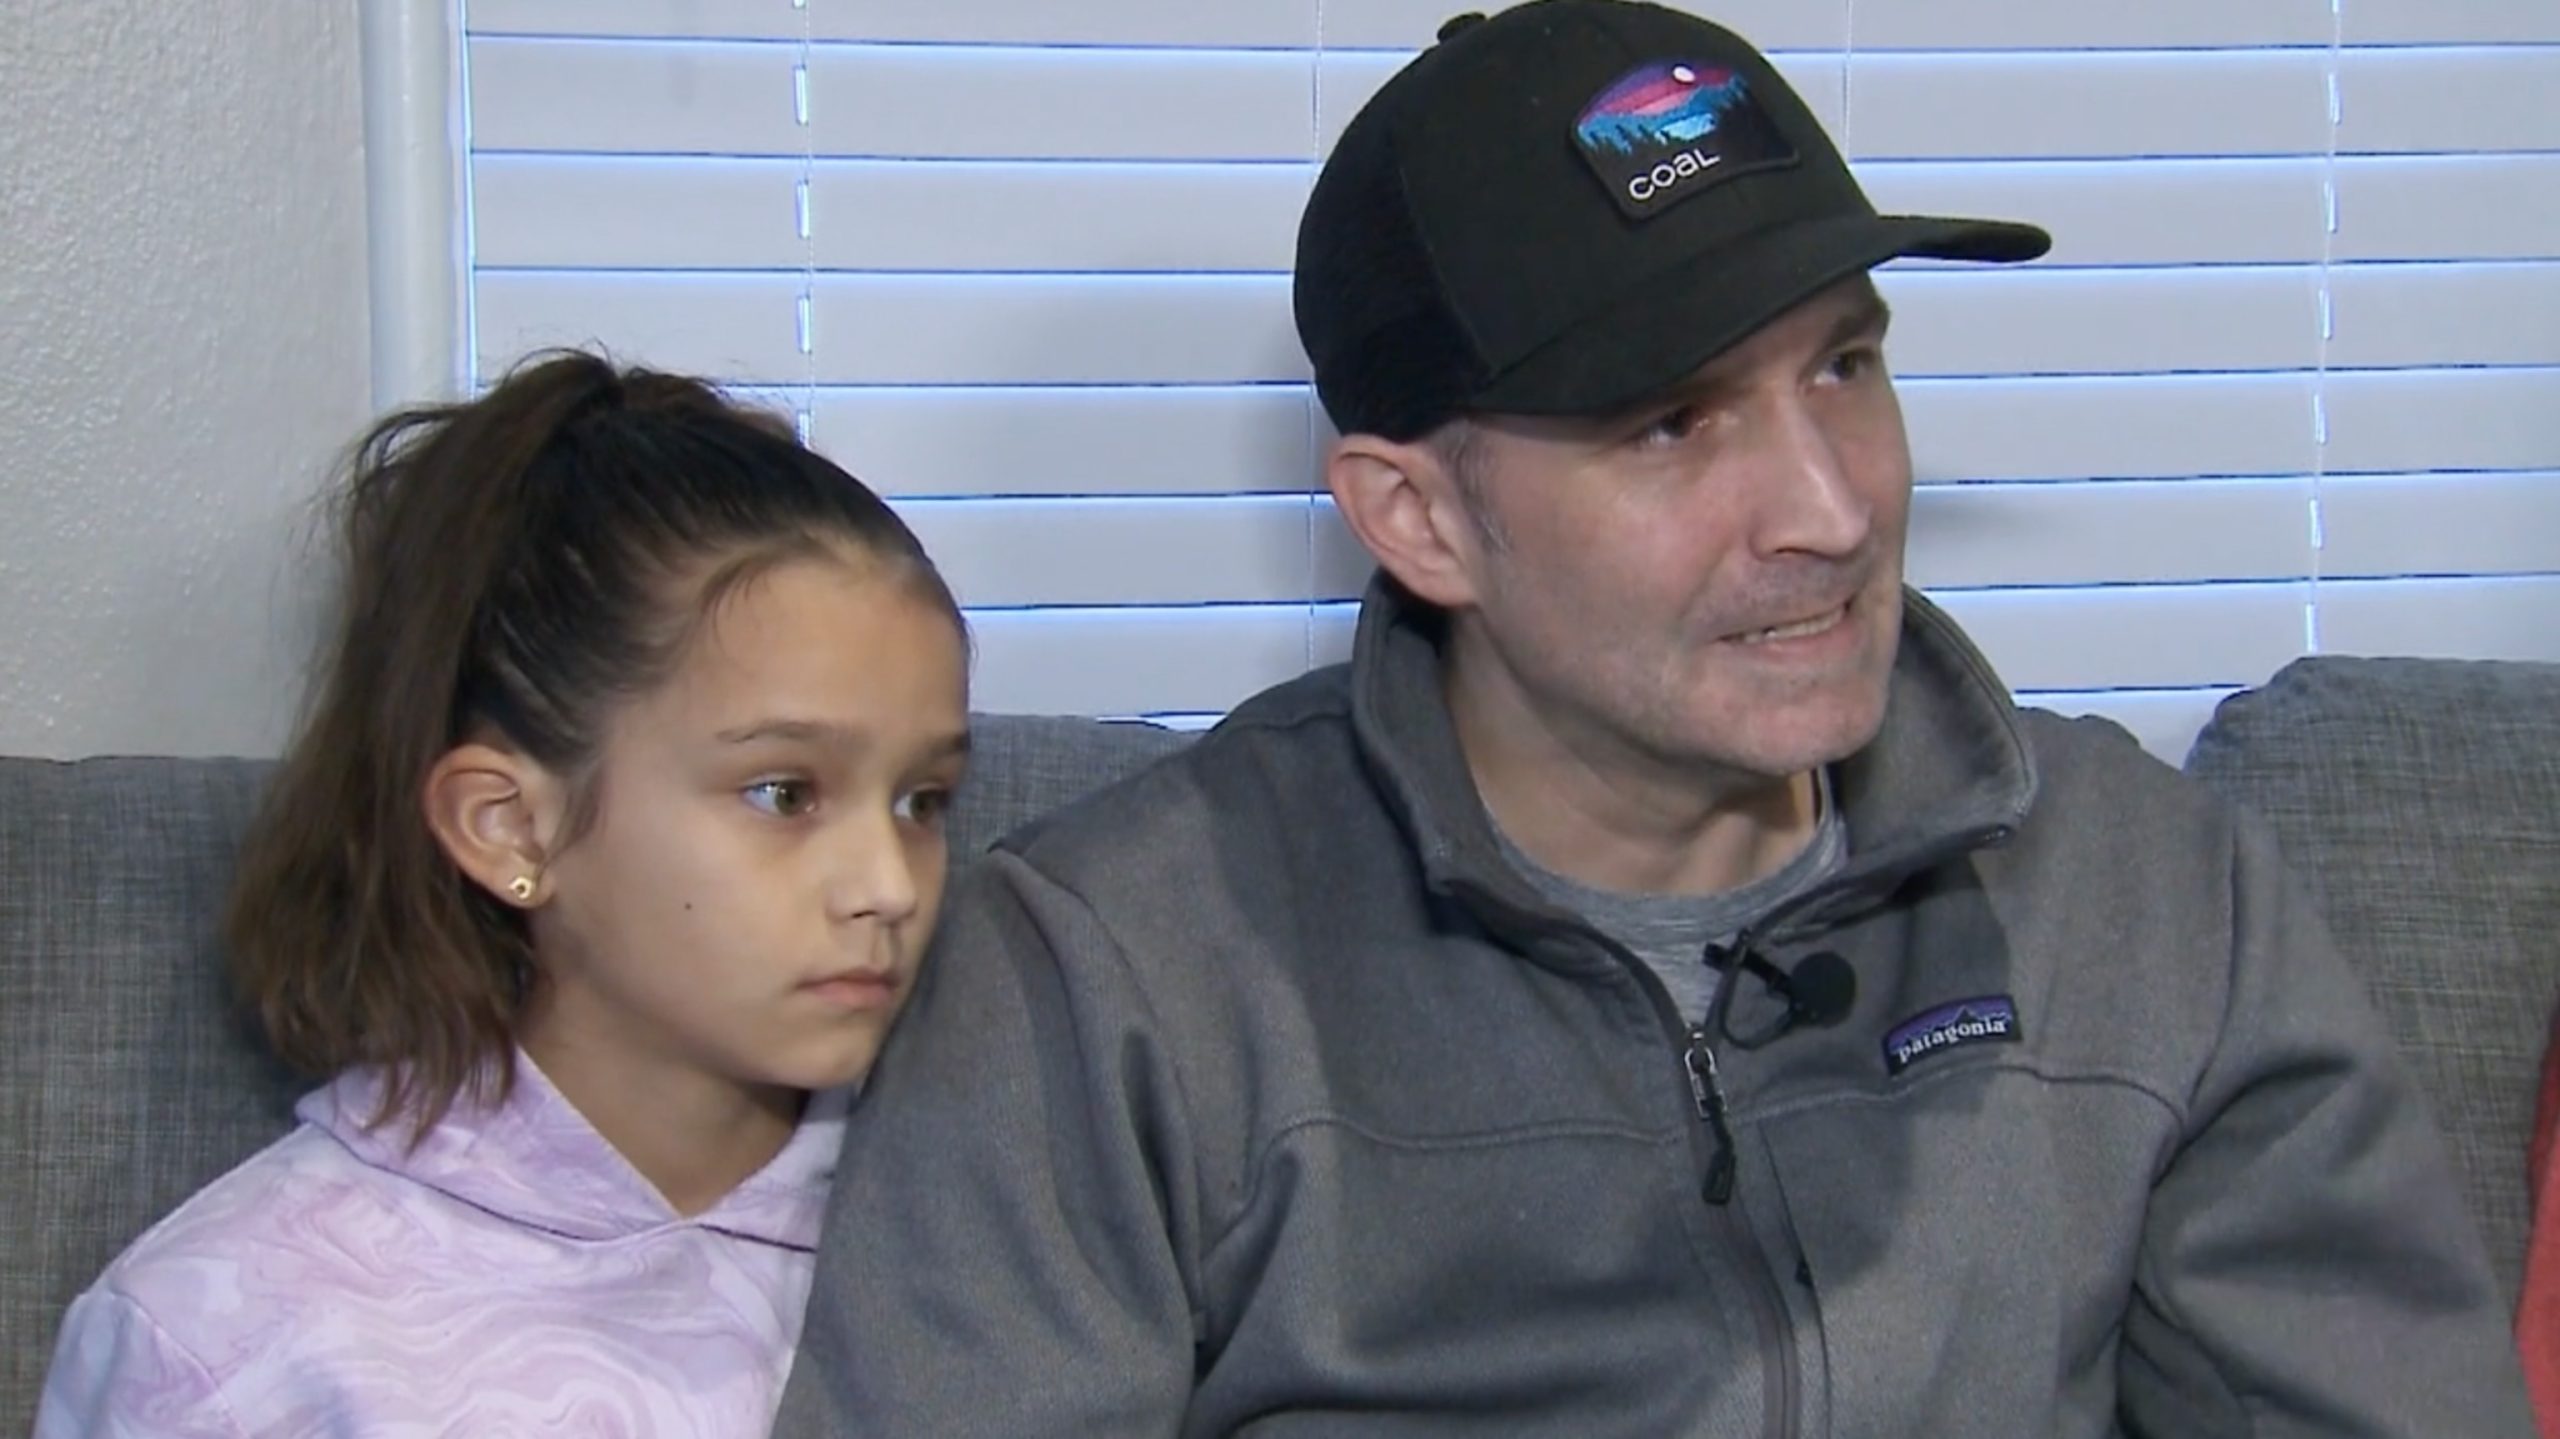 8-year-old demonstrates quick thinking by leaving voicemail for mom during carjacking